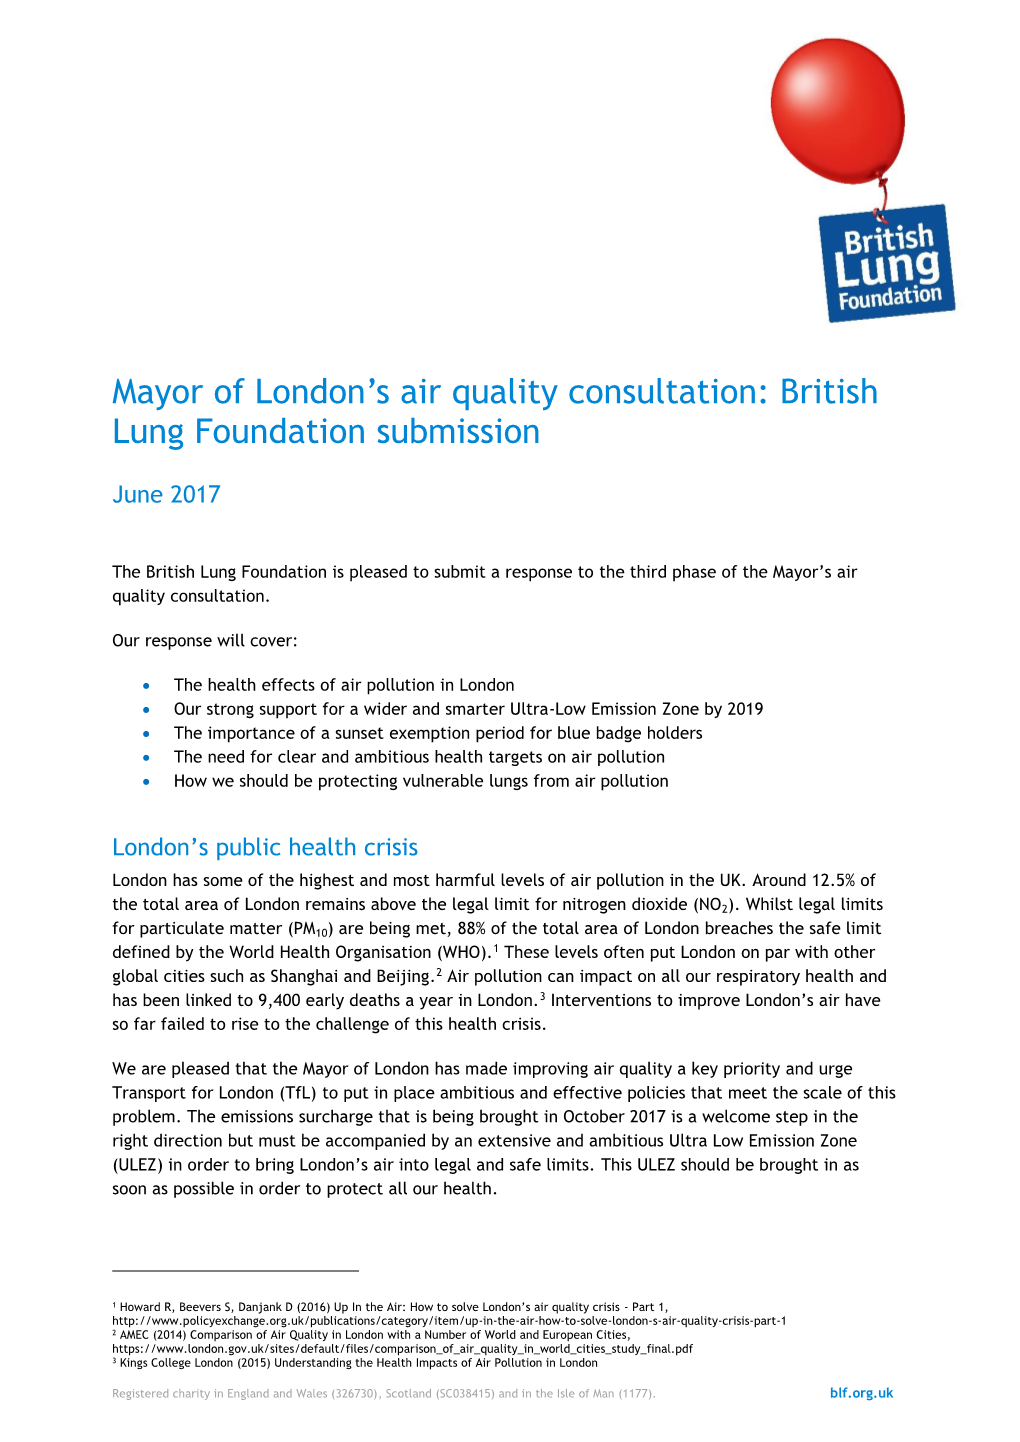 Mayor of London's Air Quality Consultation: British Lung Foundation Submission